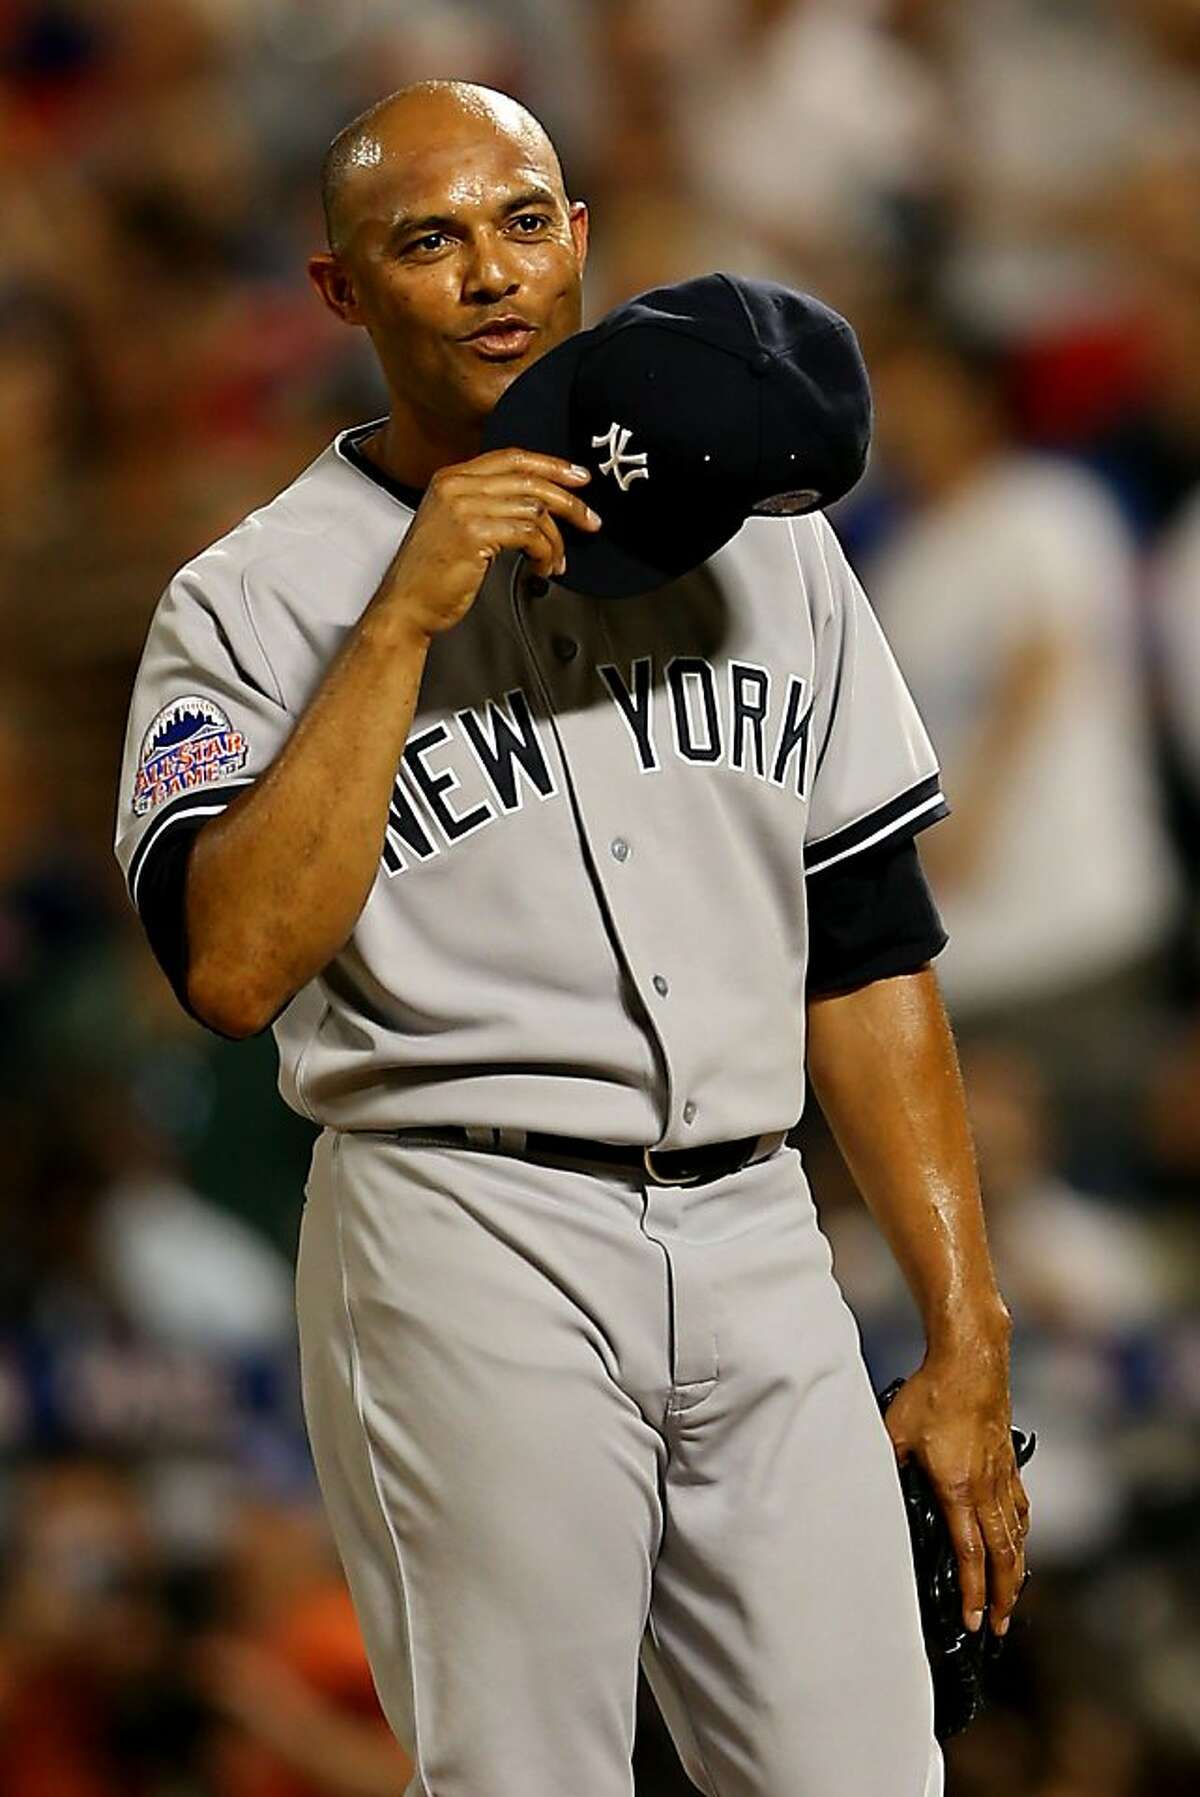 Mariano Rivera's final All-Star appearance a classic